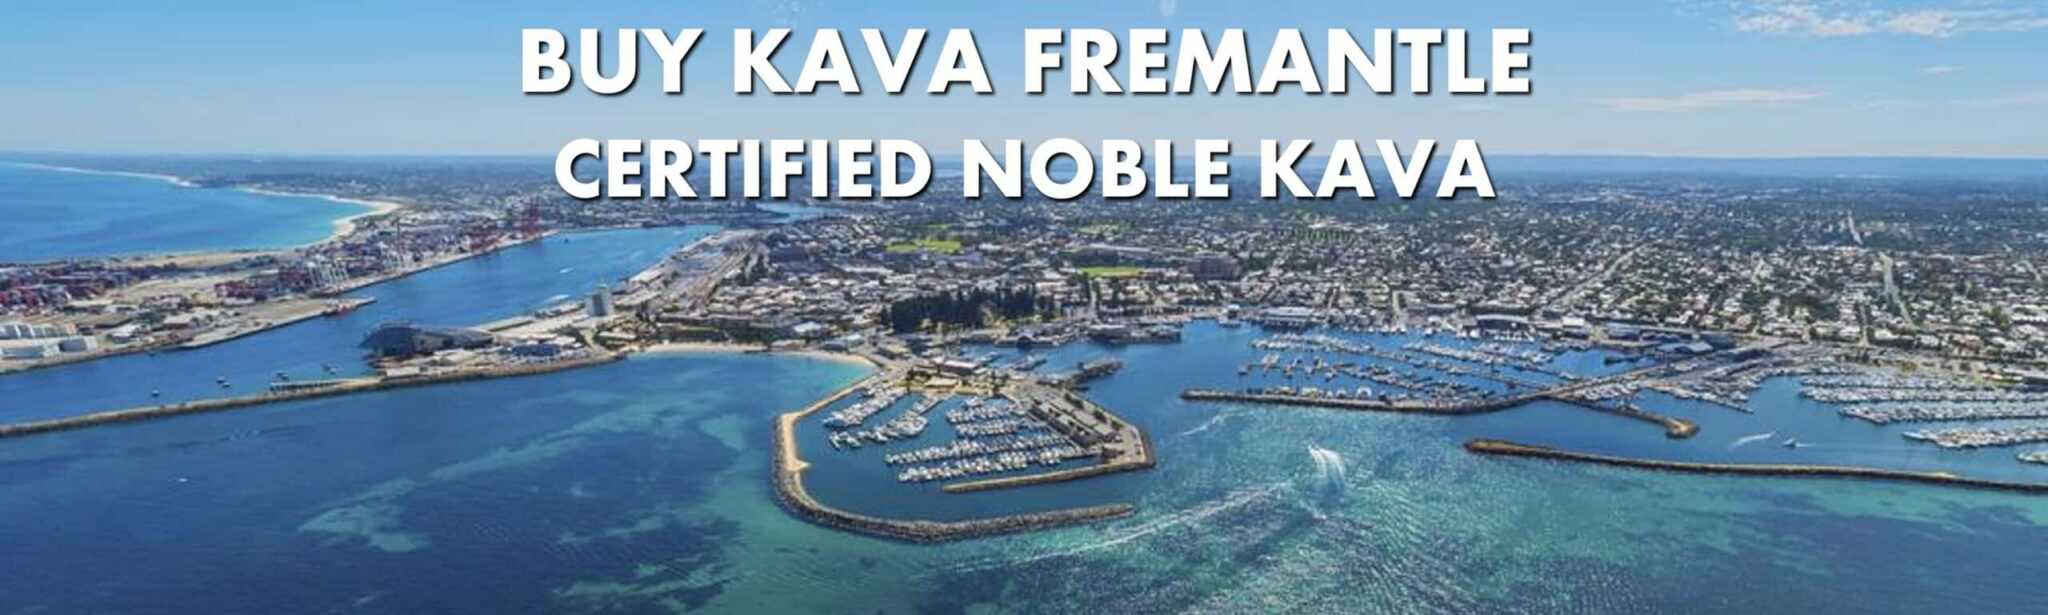 Aerial view of Fremantle with the description - "Buy Kava in Fremantle"